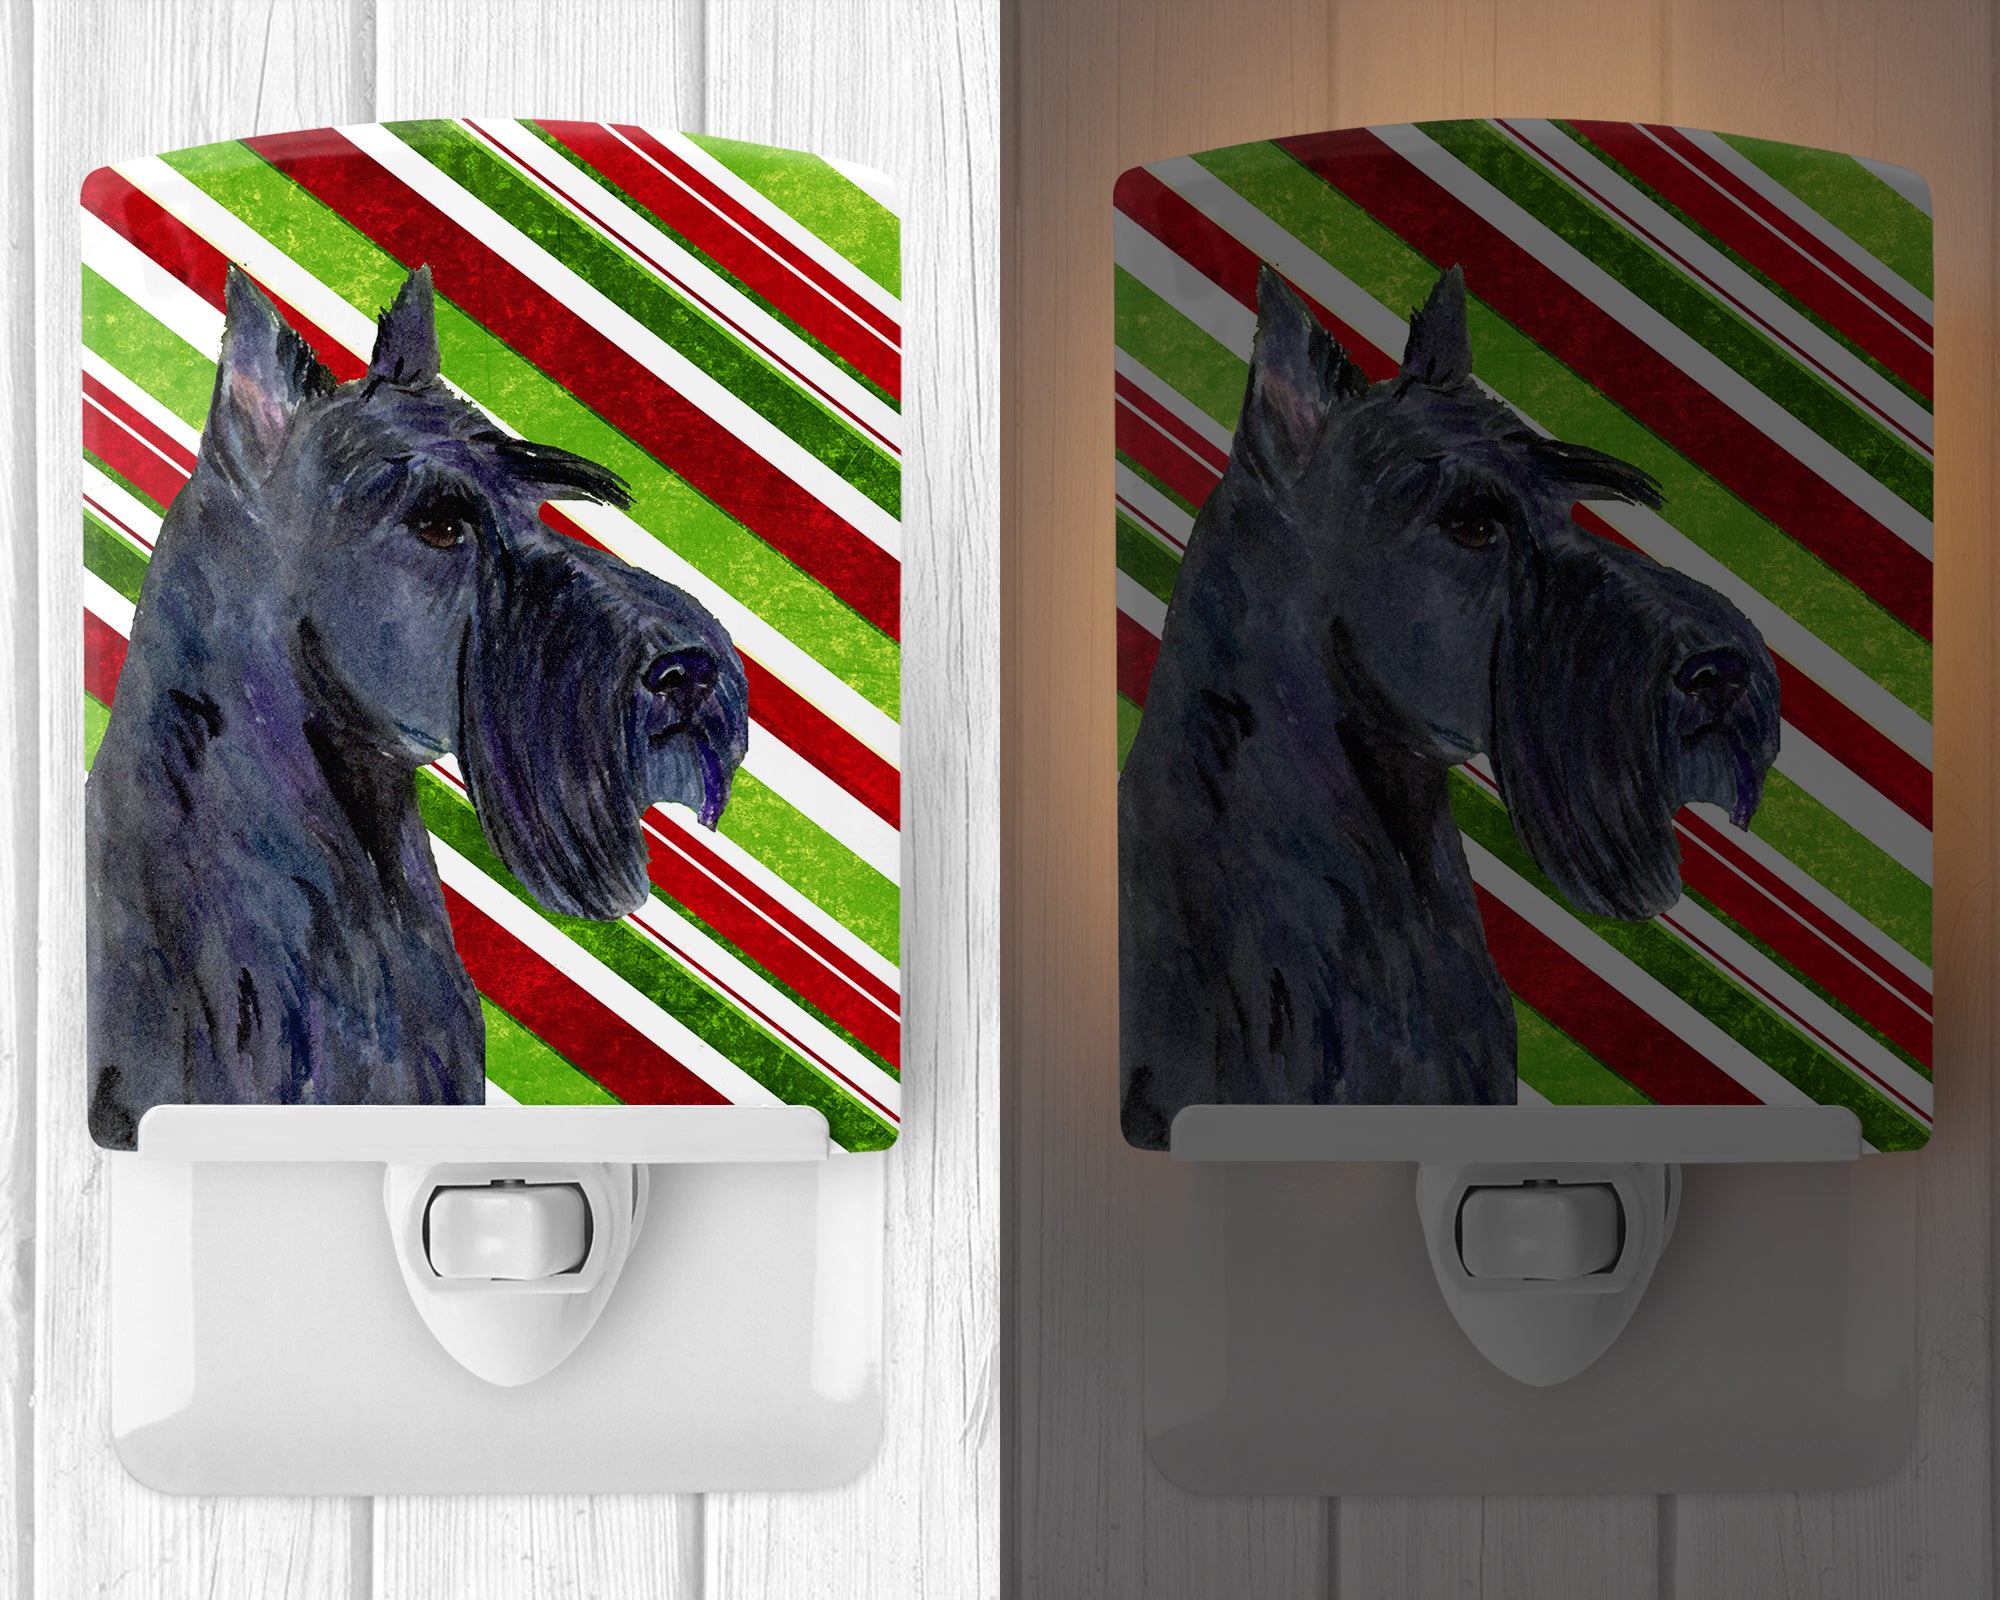 Scottish Terrier Candy Cane Holiday Christmas Ceramic Night Light SS4598CNL - the-store.com